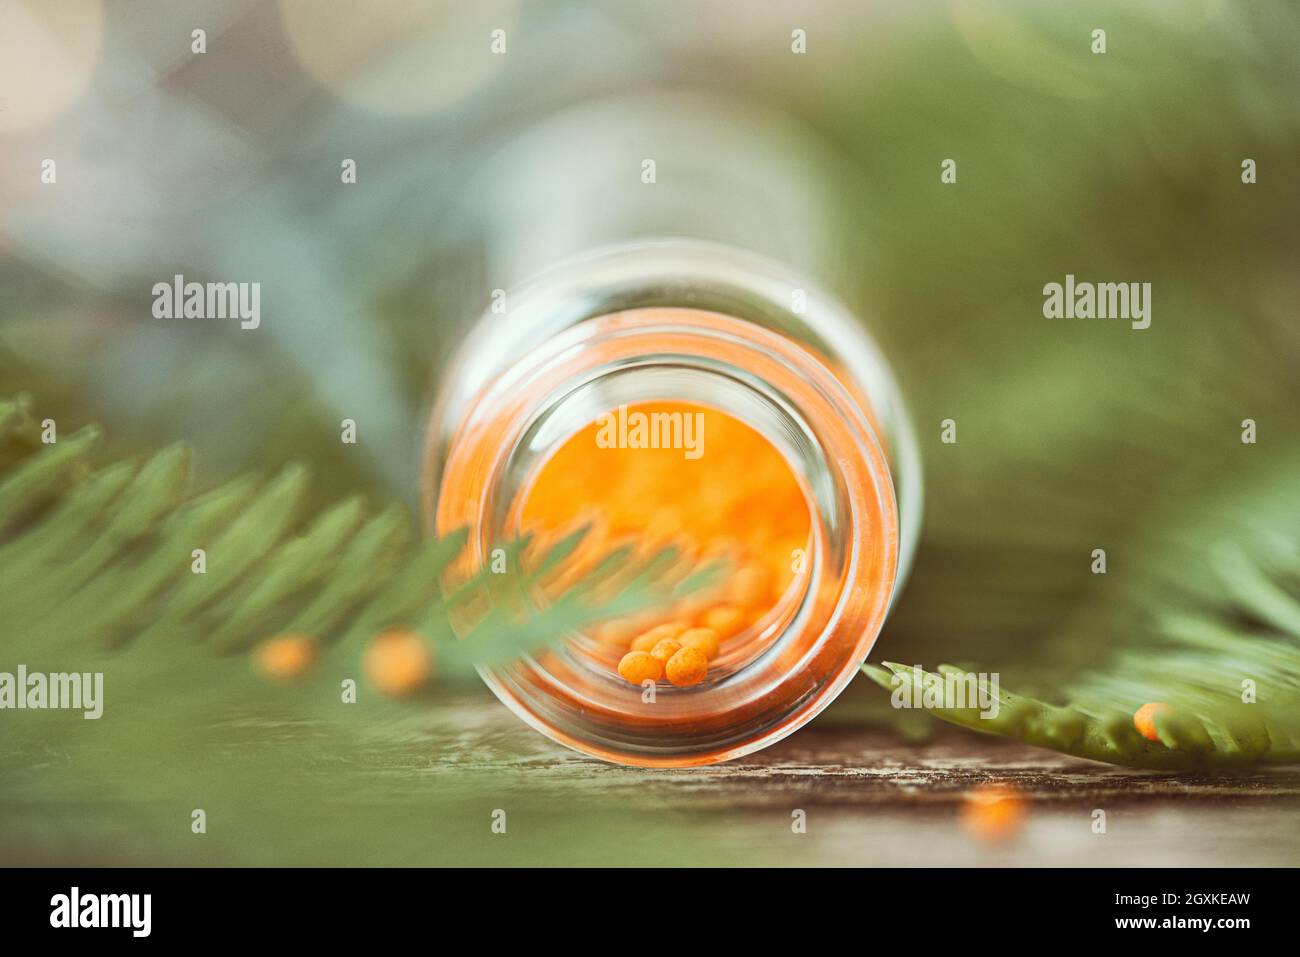 Glass jar filled with orange sprinkles next to a fir tree branch Stock Photo